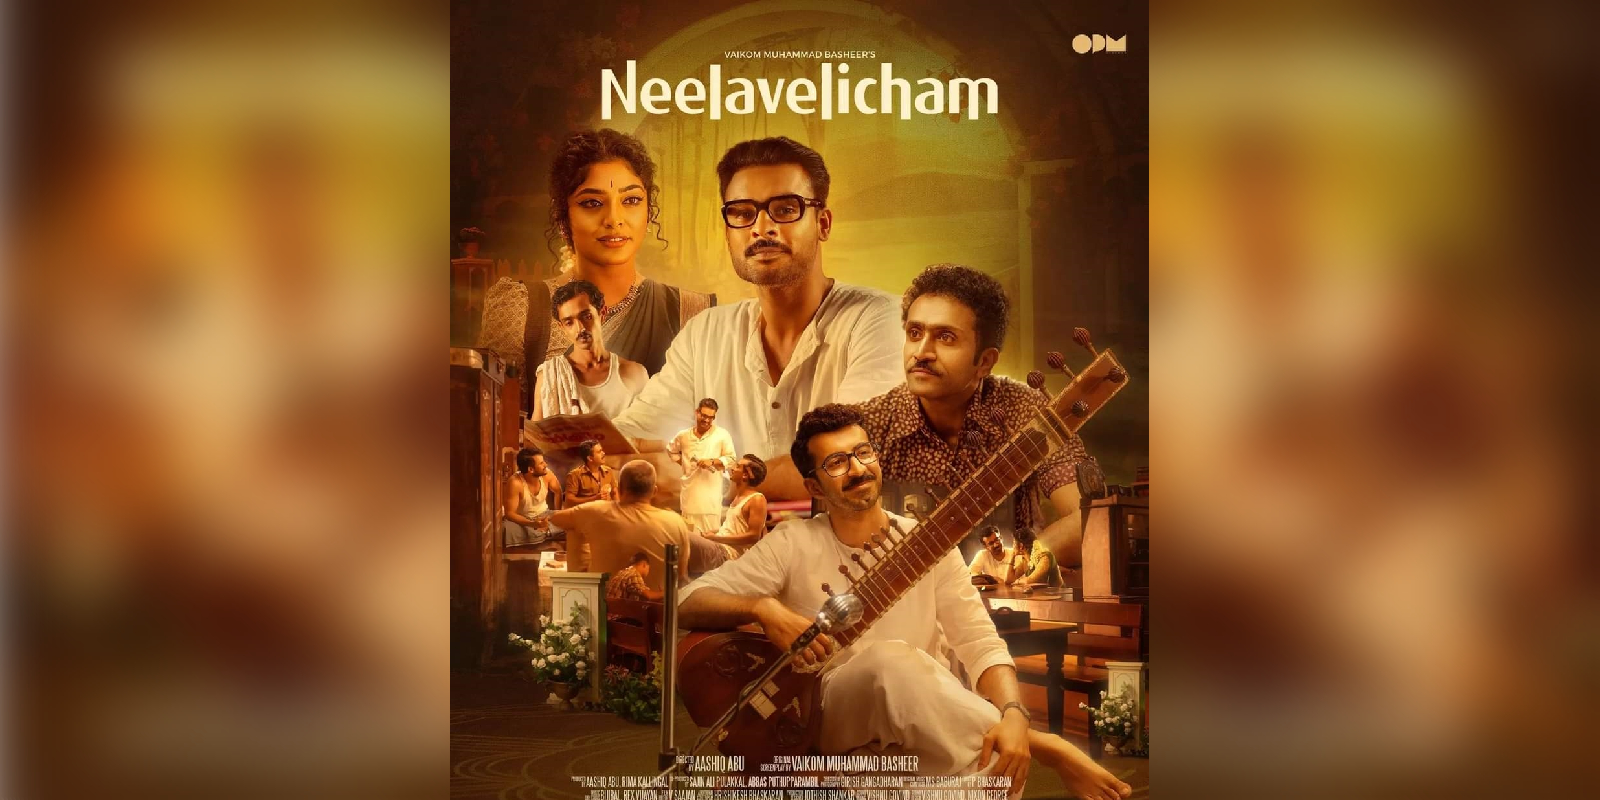 Neelavelicham review: Aashiq Abu’s experimental movie is a technical upgrade of 1964’s ‘Bhargavi Nilayam’